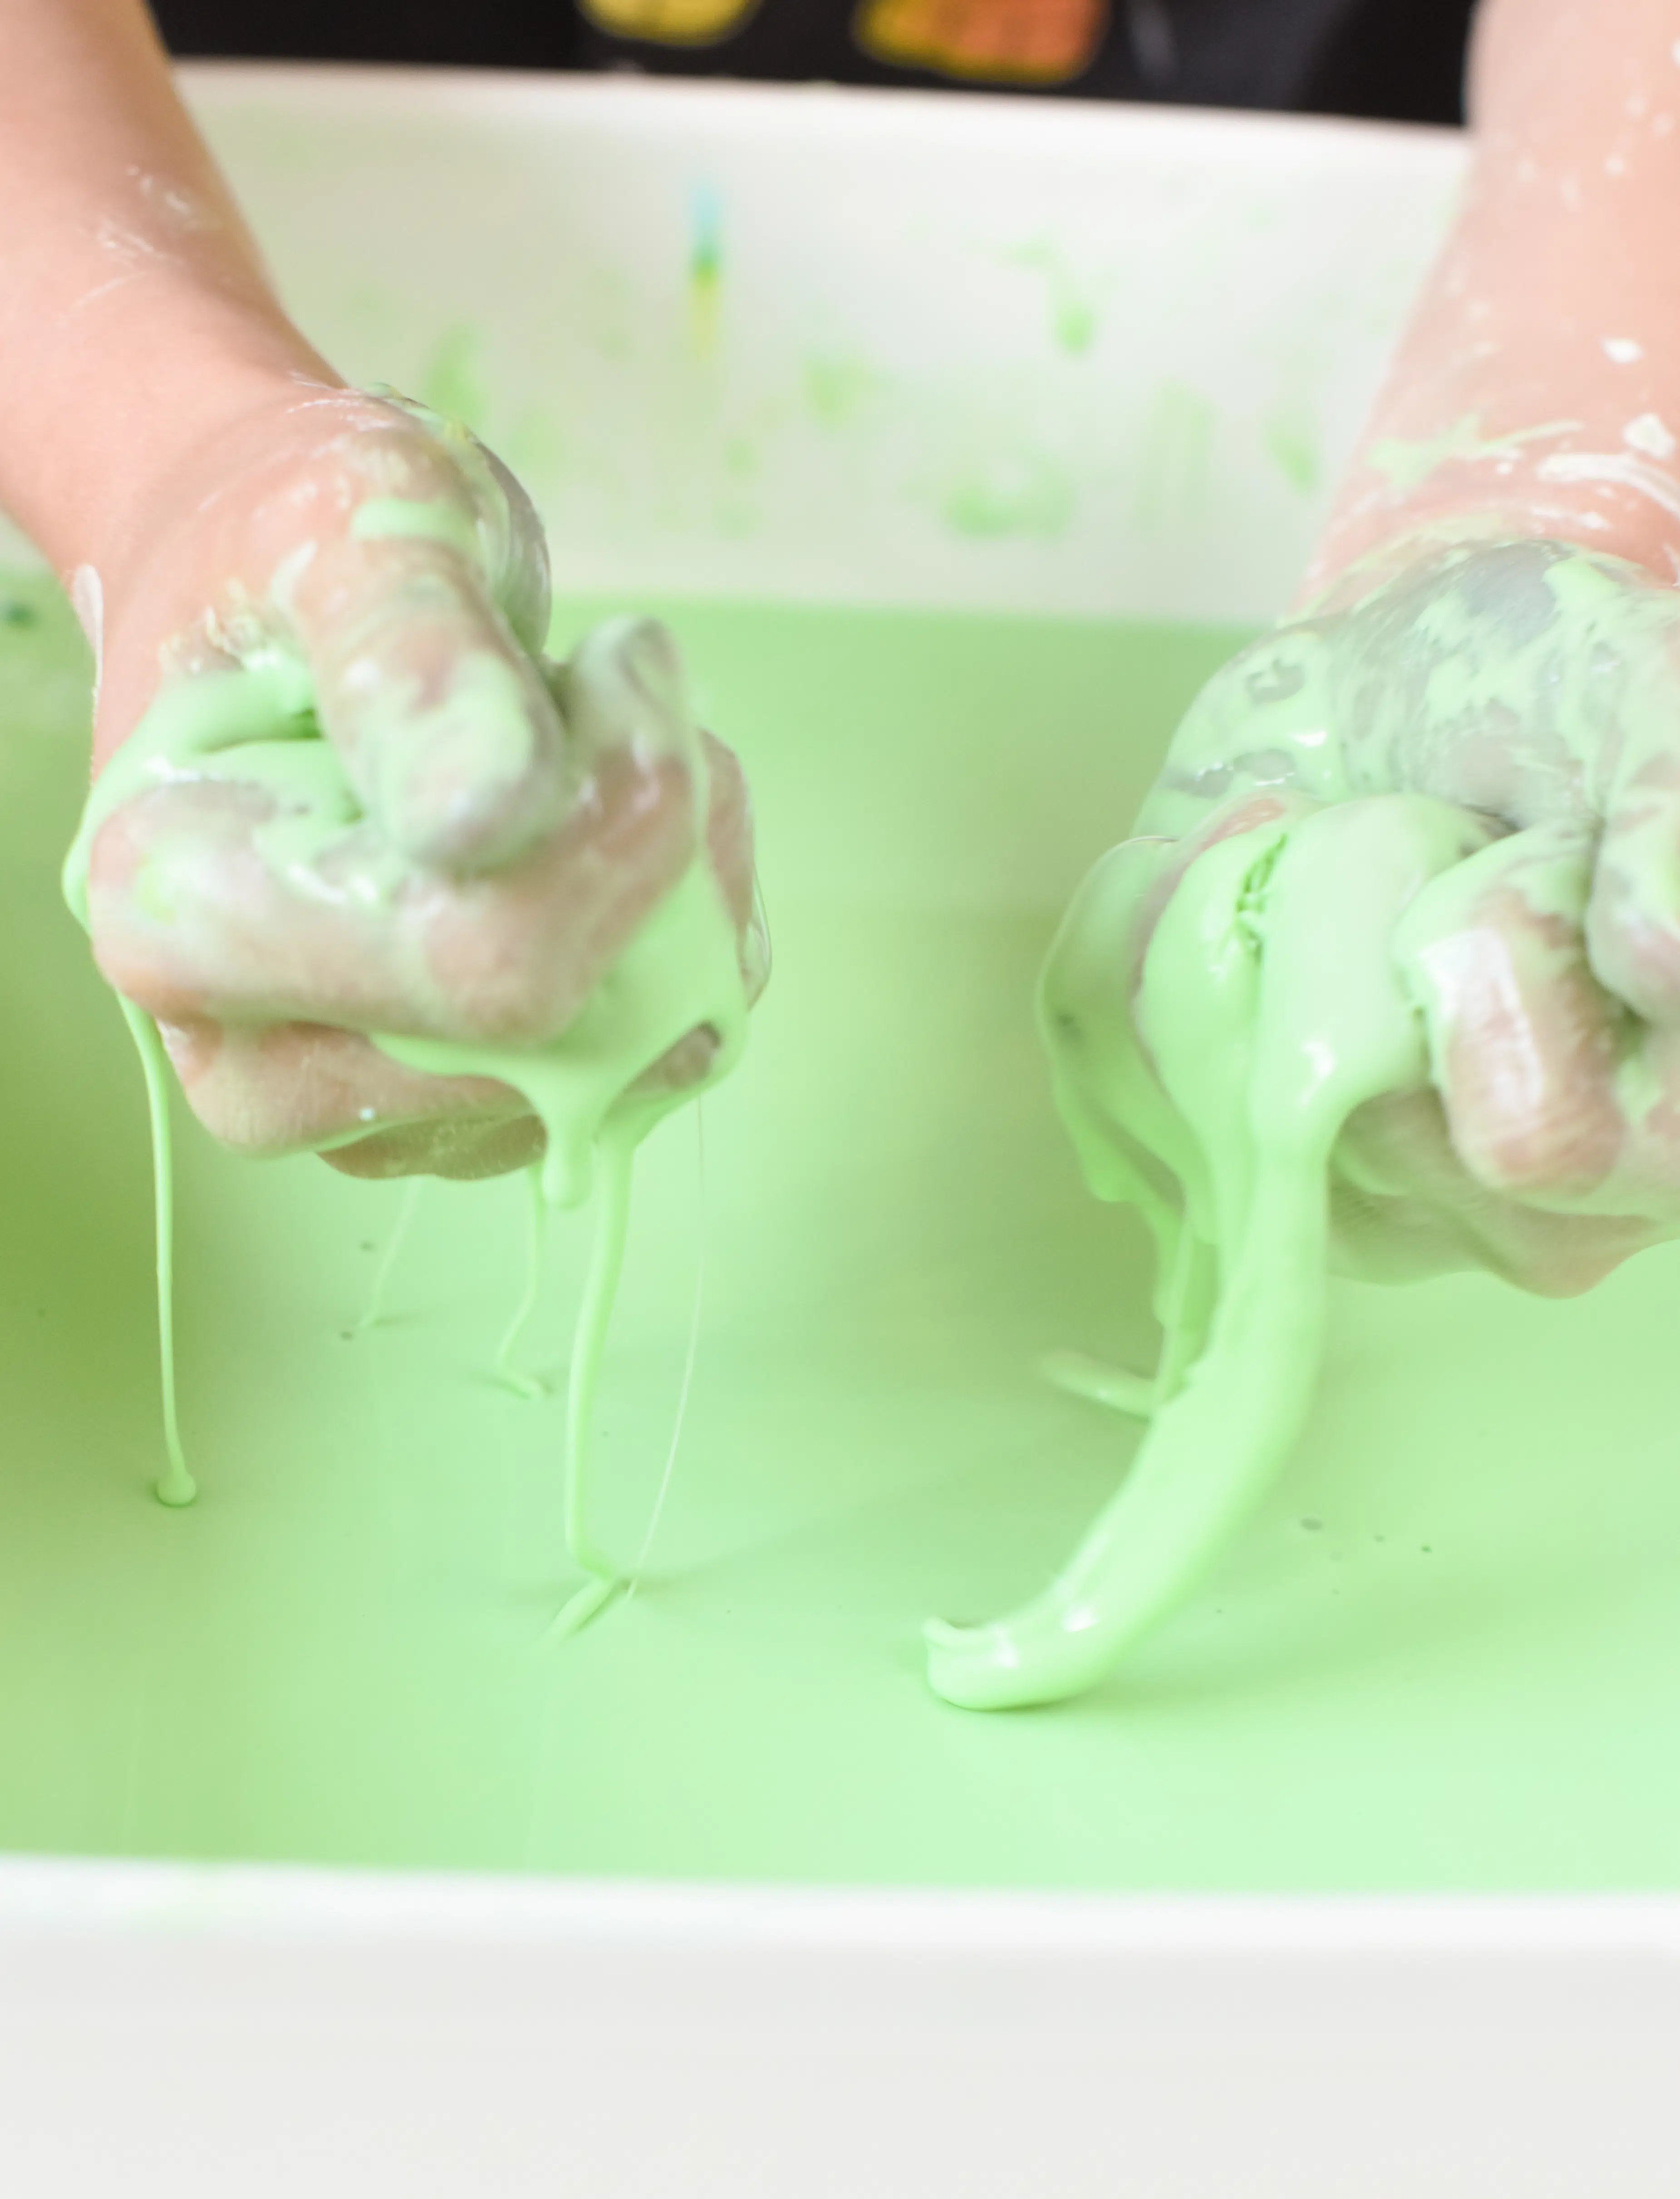 How To Make Slime Without Glue l How To Make Slime With Flour and Water l  How To Make Slime 